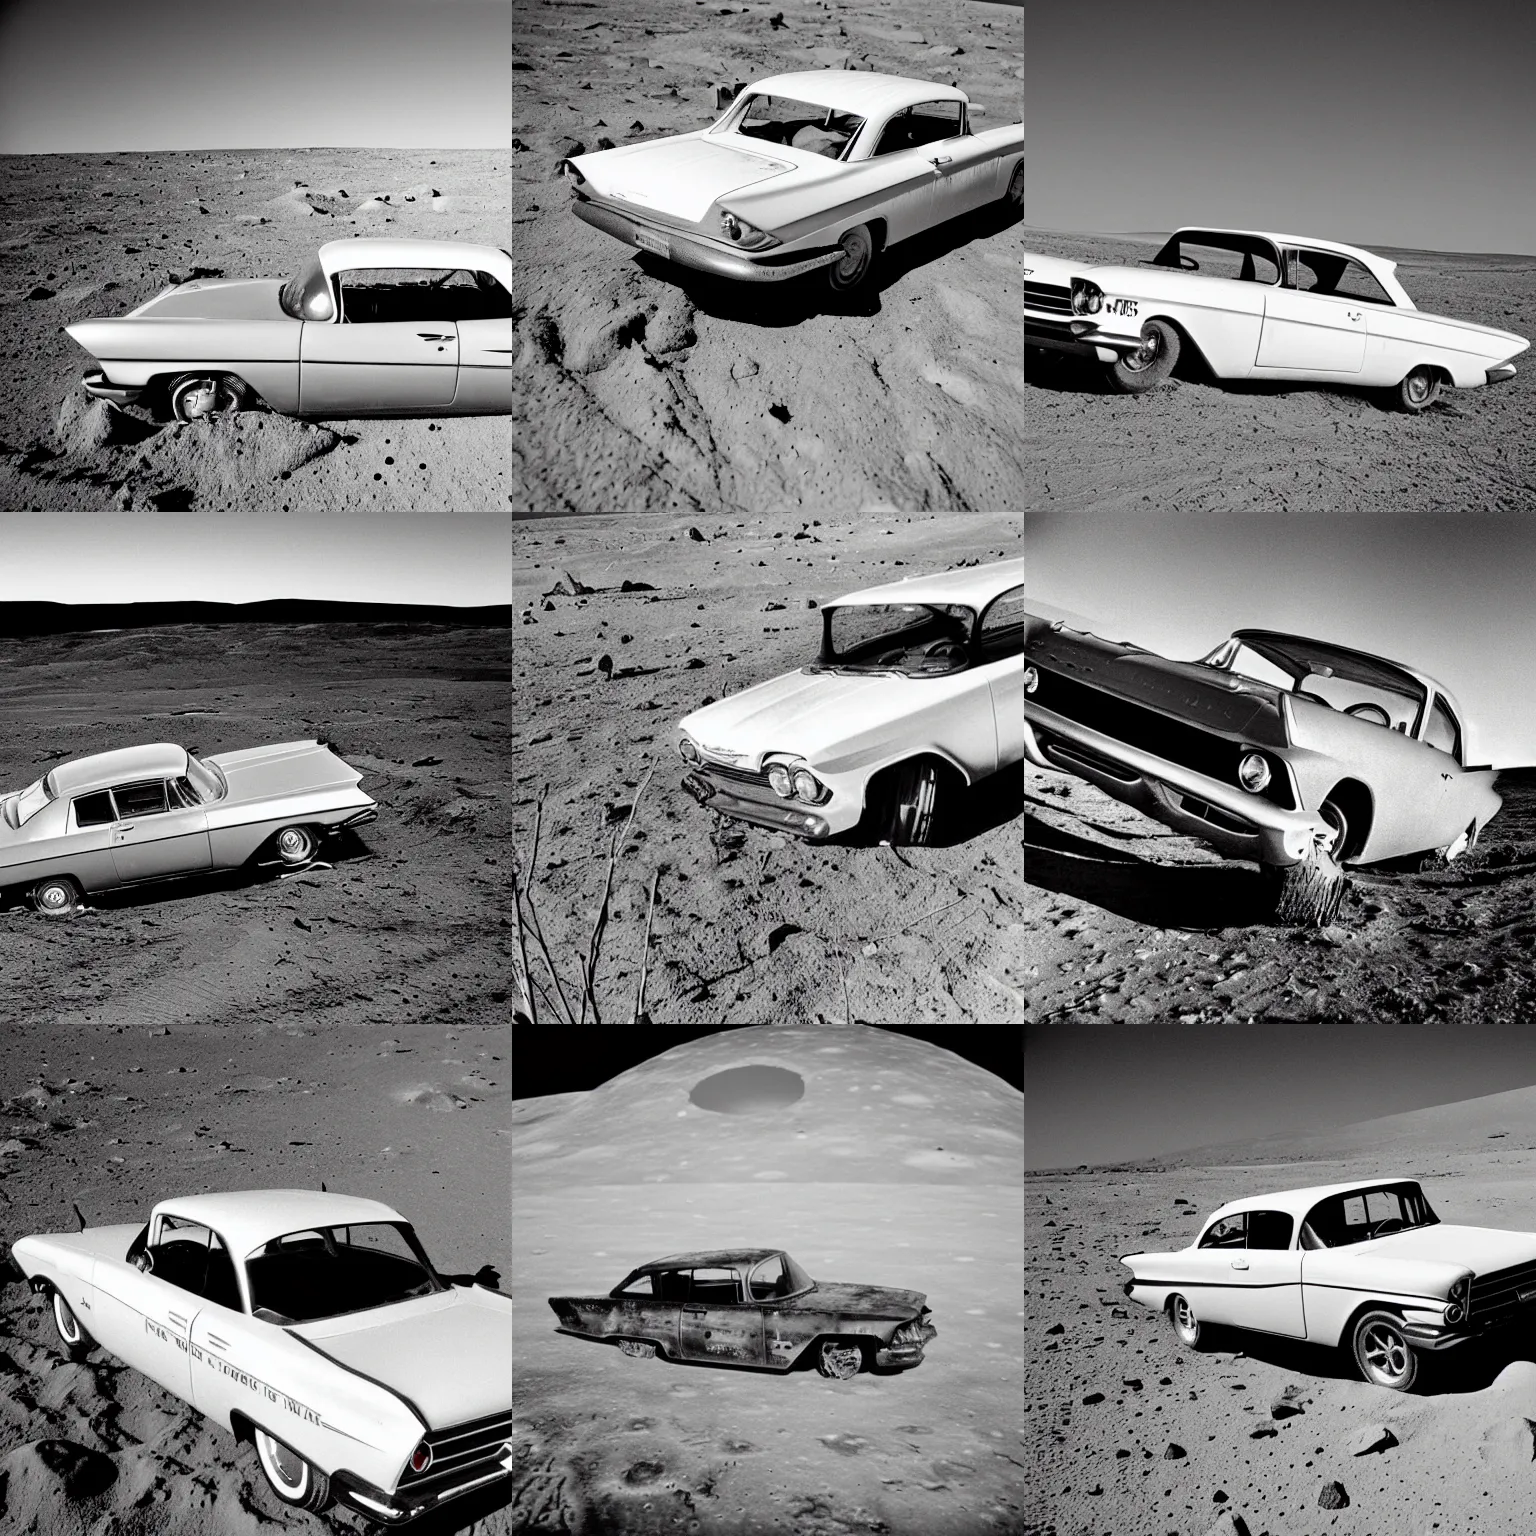 Prompt: A 1960's classified government photograph of a 1960 Chevrolet Biscayne coupe wrecked on the surface of the Moon, black and white 35mm photography